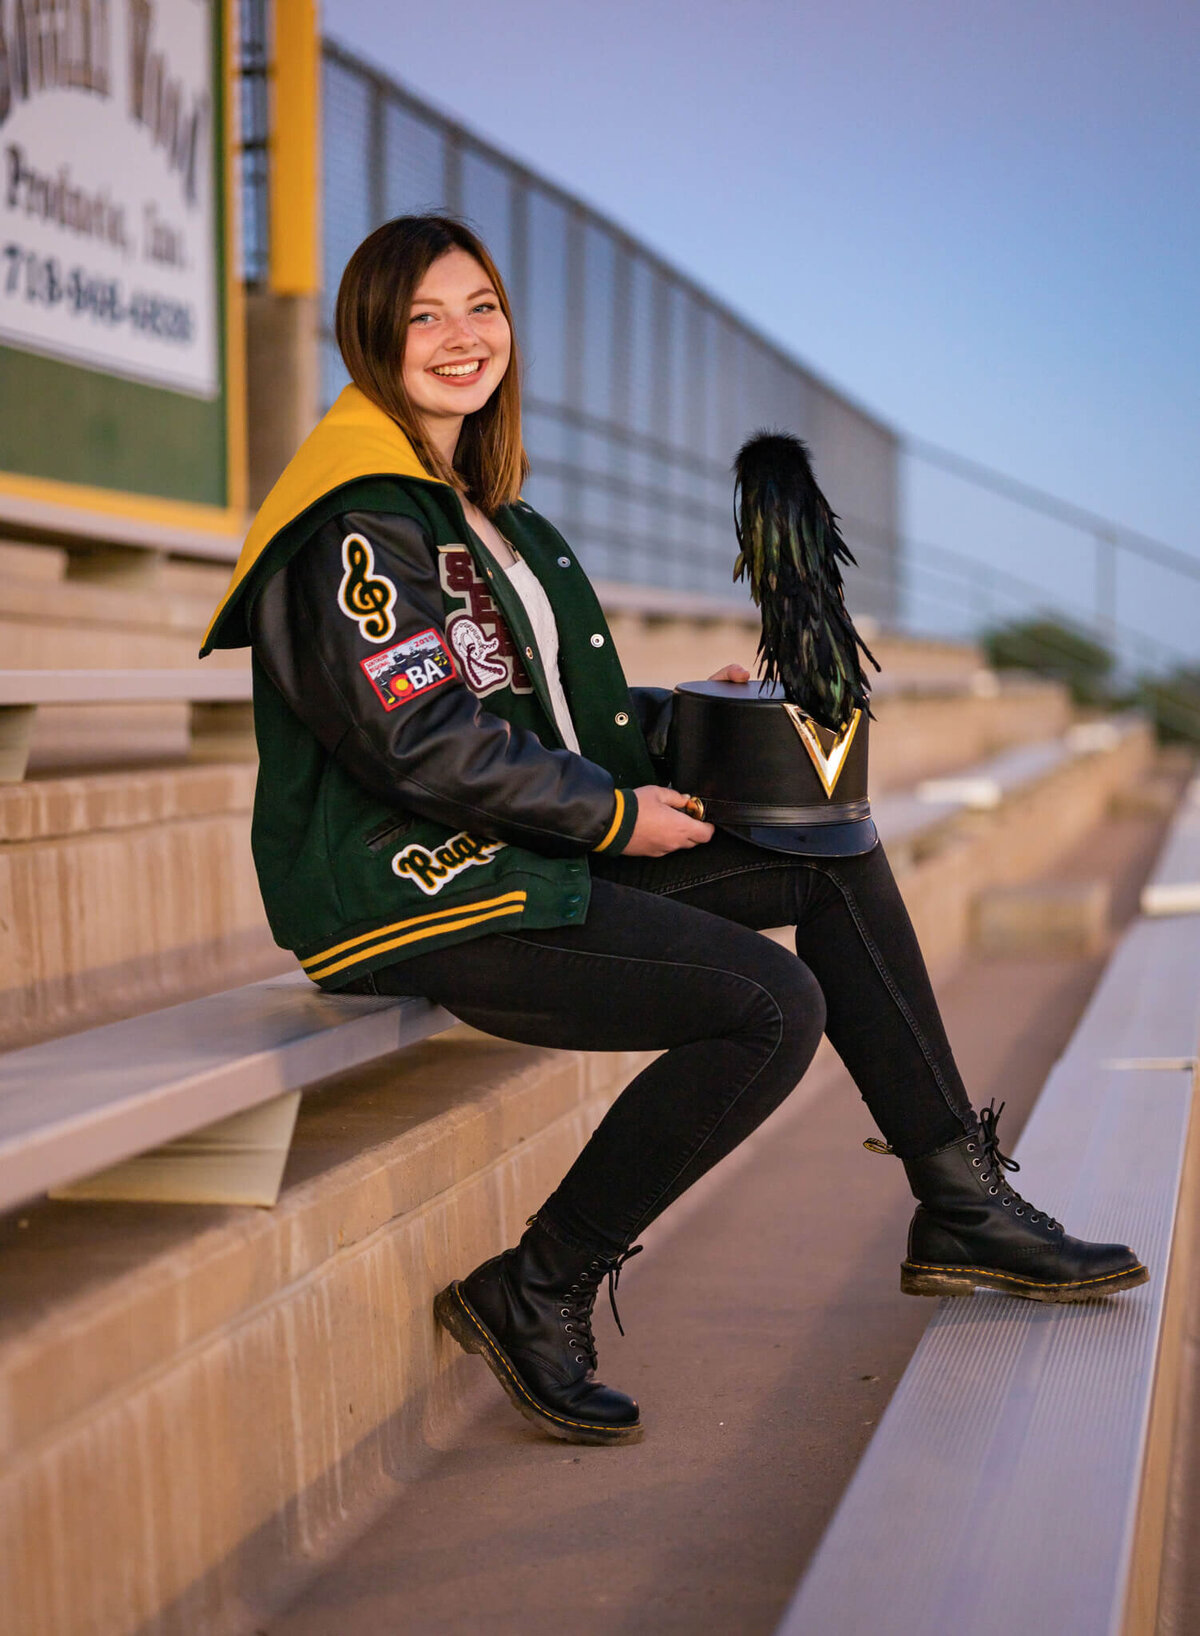 high school senior wearing her letterman jacket and holding her marching band hat sitting in the football stands